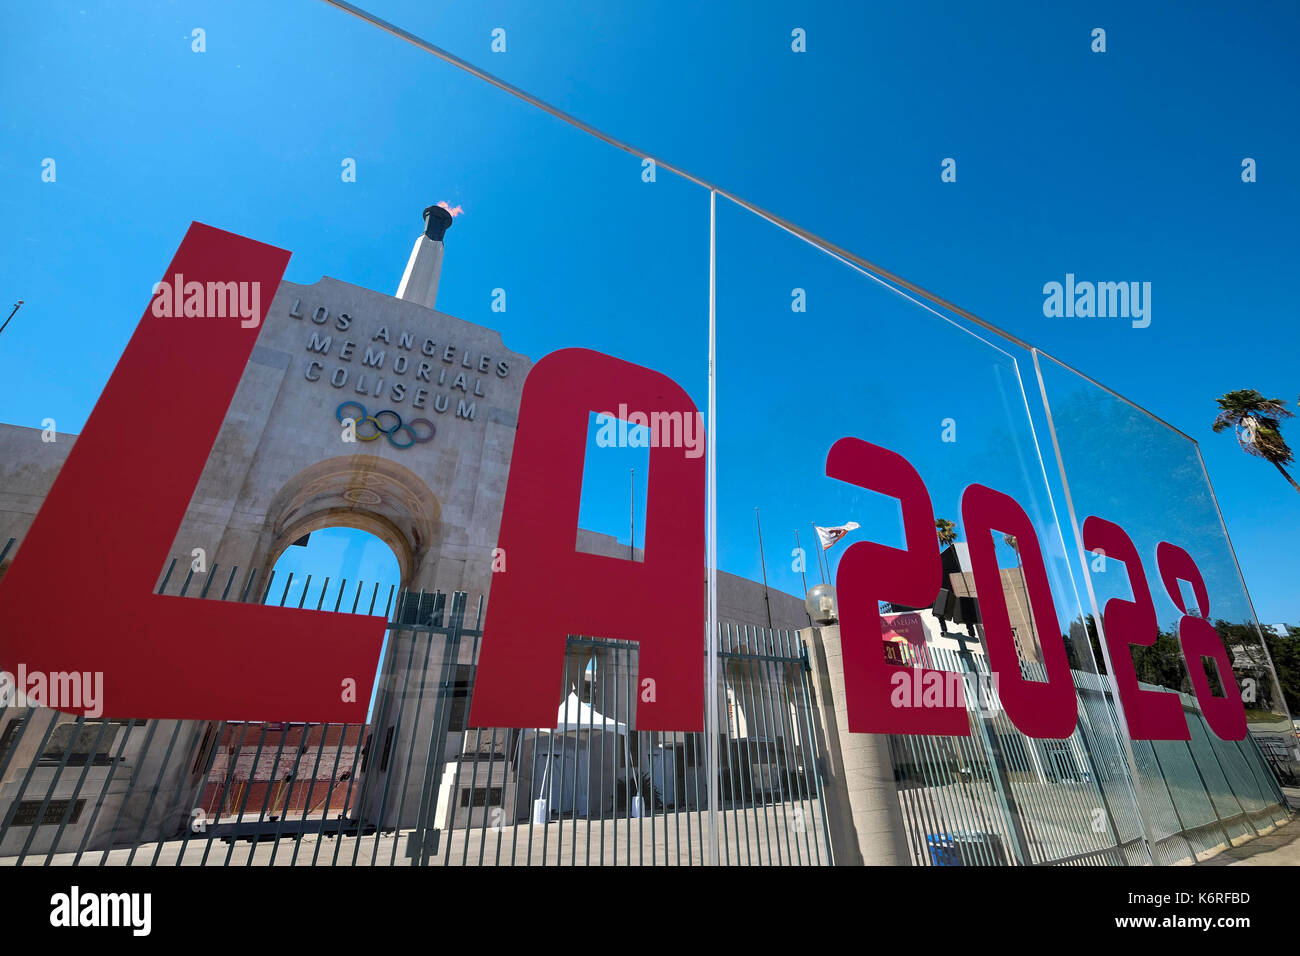 Los Angeles, USA. 13th Sep, 2017. A sign writing 'LA 2028' and a blazing Olympic cauldron are seen at the Los Angeles Memorial Coliseum, the United States, Sept. 13, 2017. The cauldron was lit early Wednesday morning at the stadium that was the site of the 1932 and 1984 Olympics. The International Olympic Committee (IOC) voted Los Angeles as the host city of the 2028 Summer Olympic Games on Sept.13. Credit: Zhao Hanrong/Xinhua/Alamy Live News Stock Photo